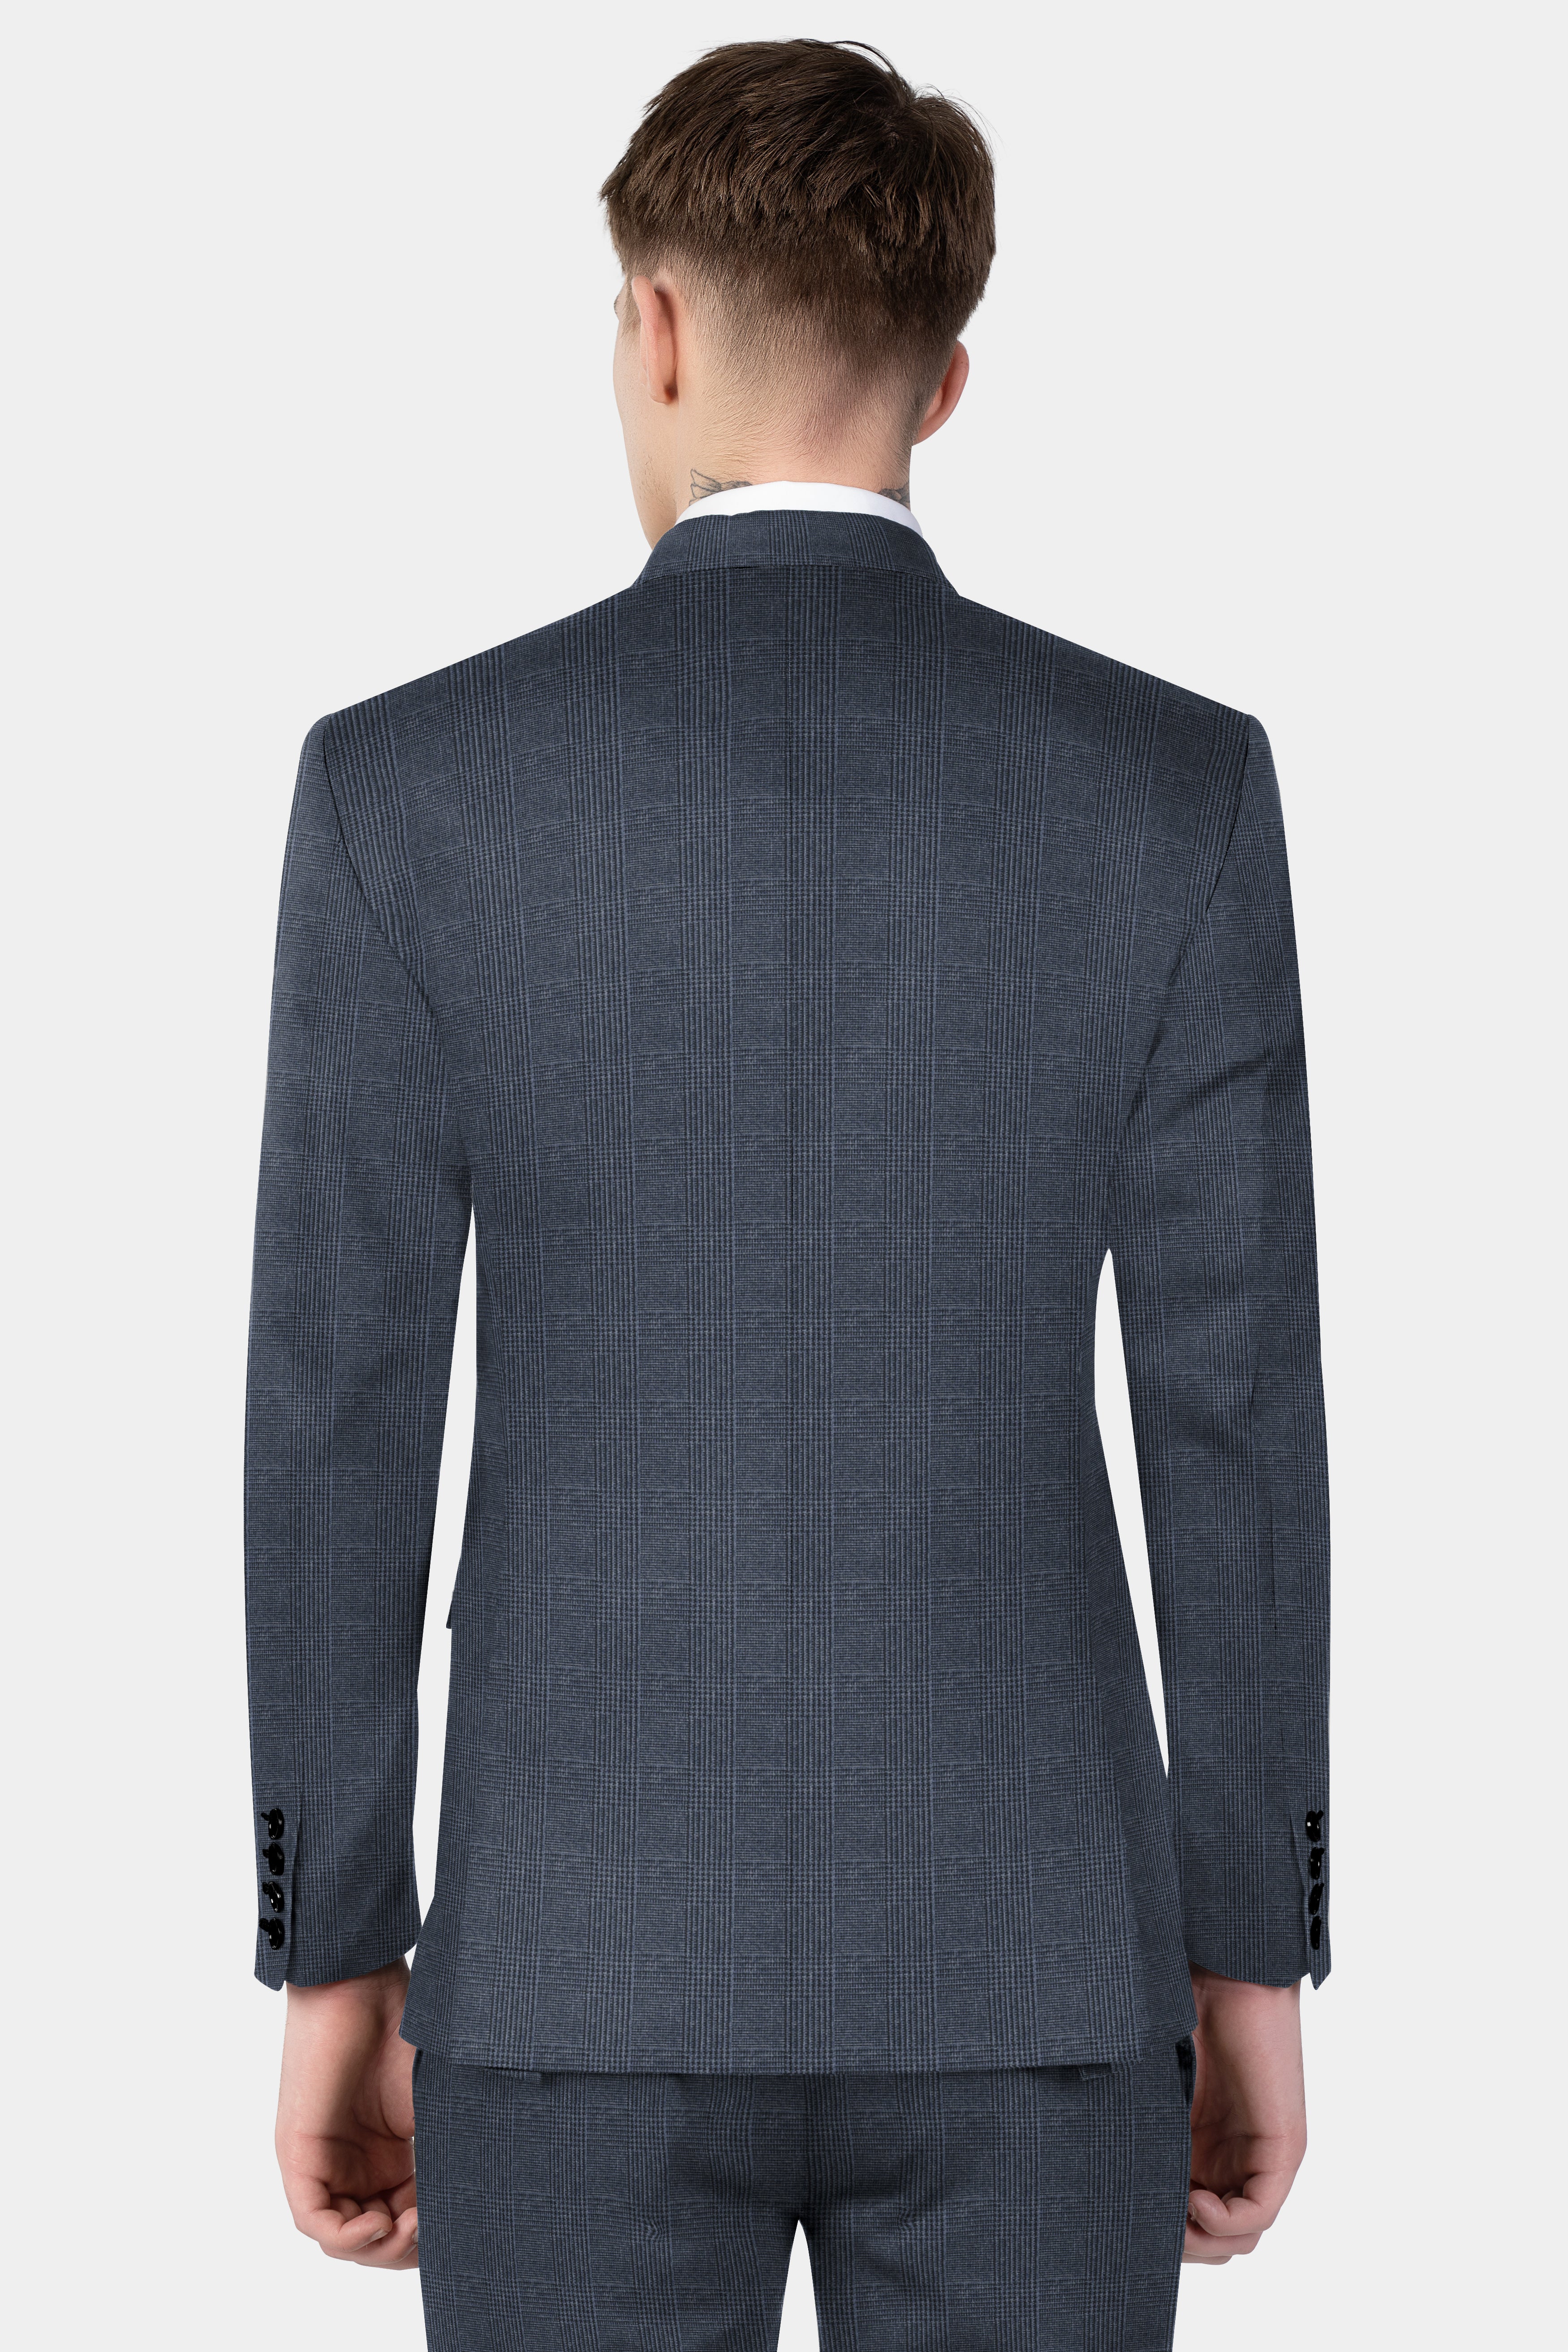 Gun Powder Gray Plaid Wool Blend Double Breasted Suit